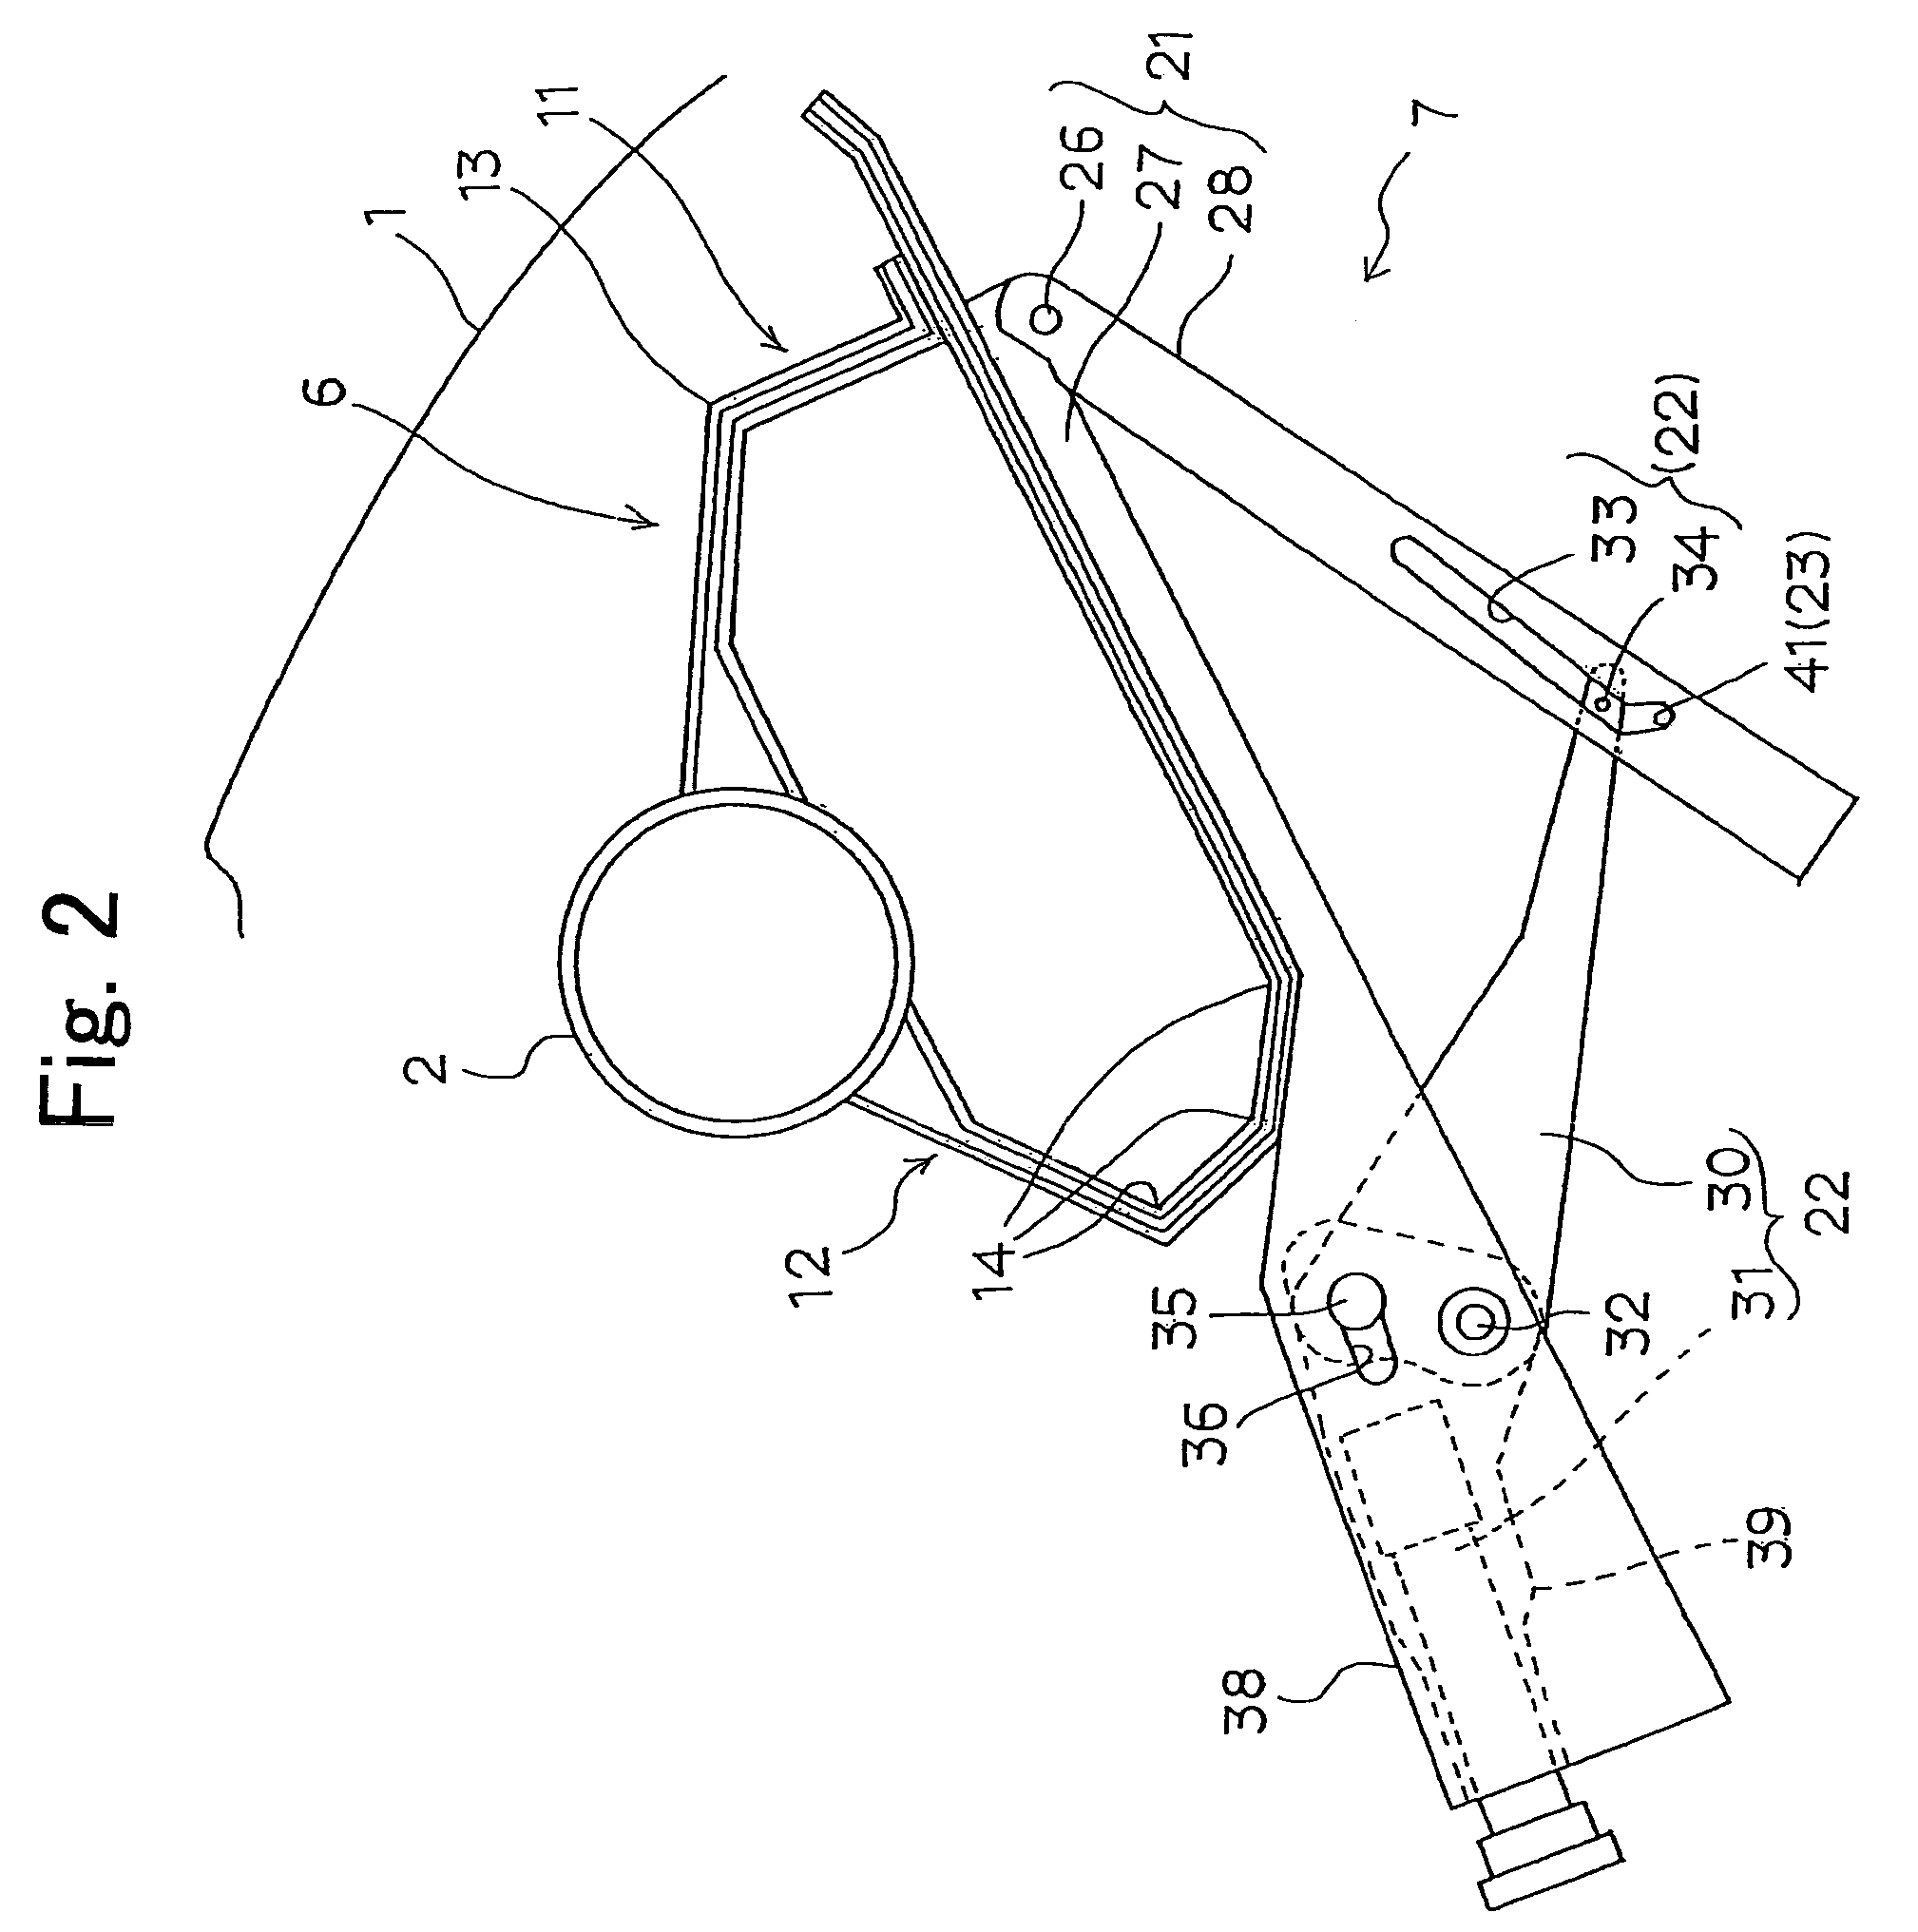 Knee bolster structure